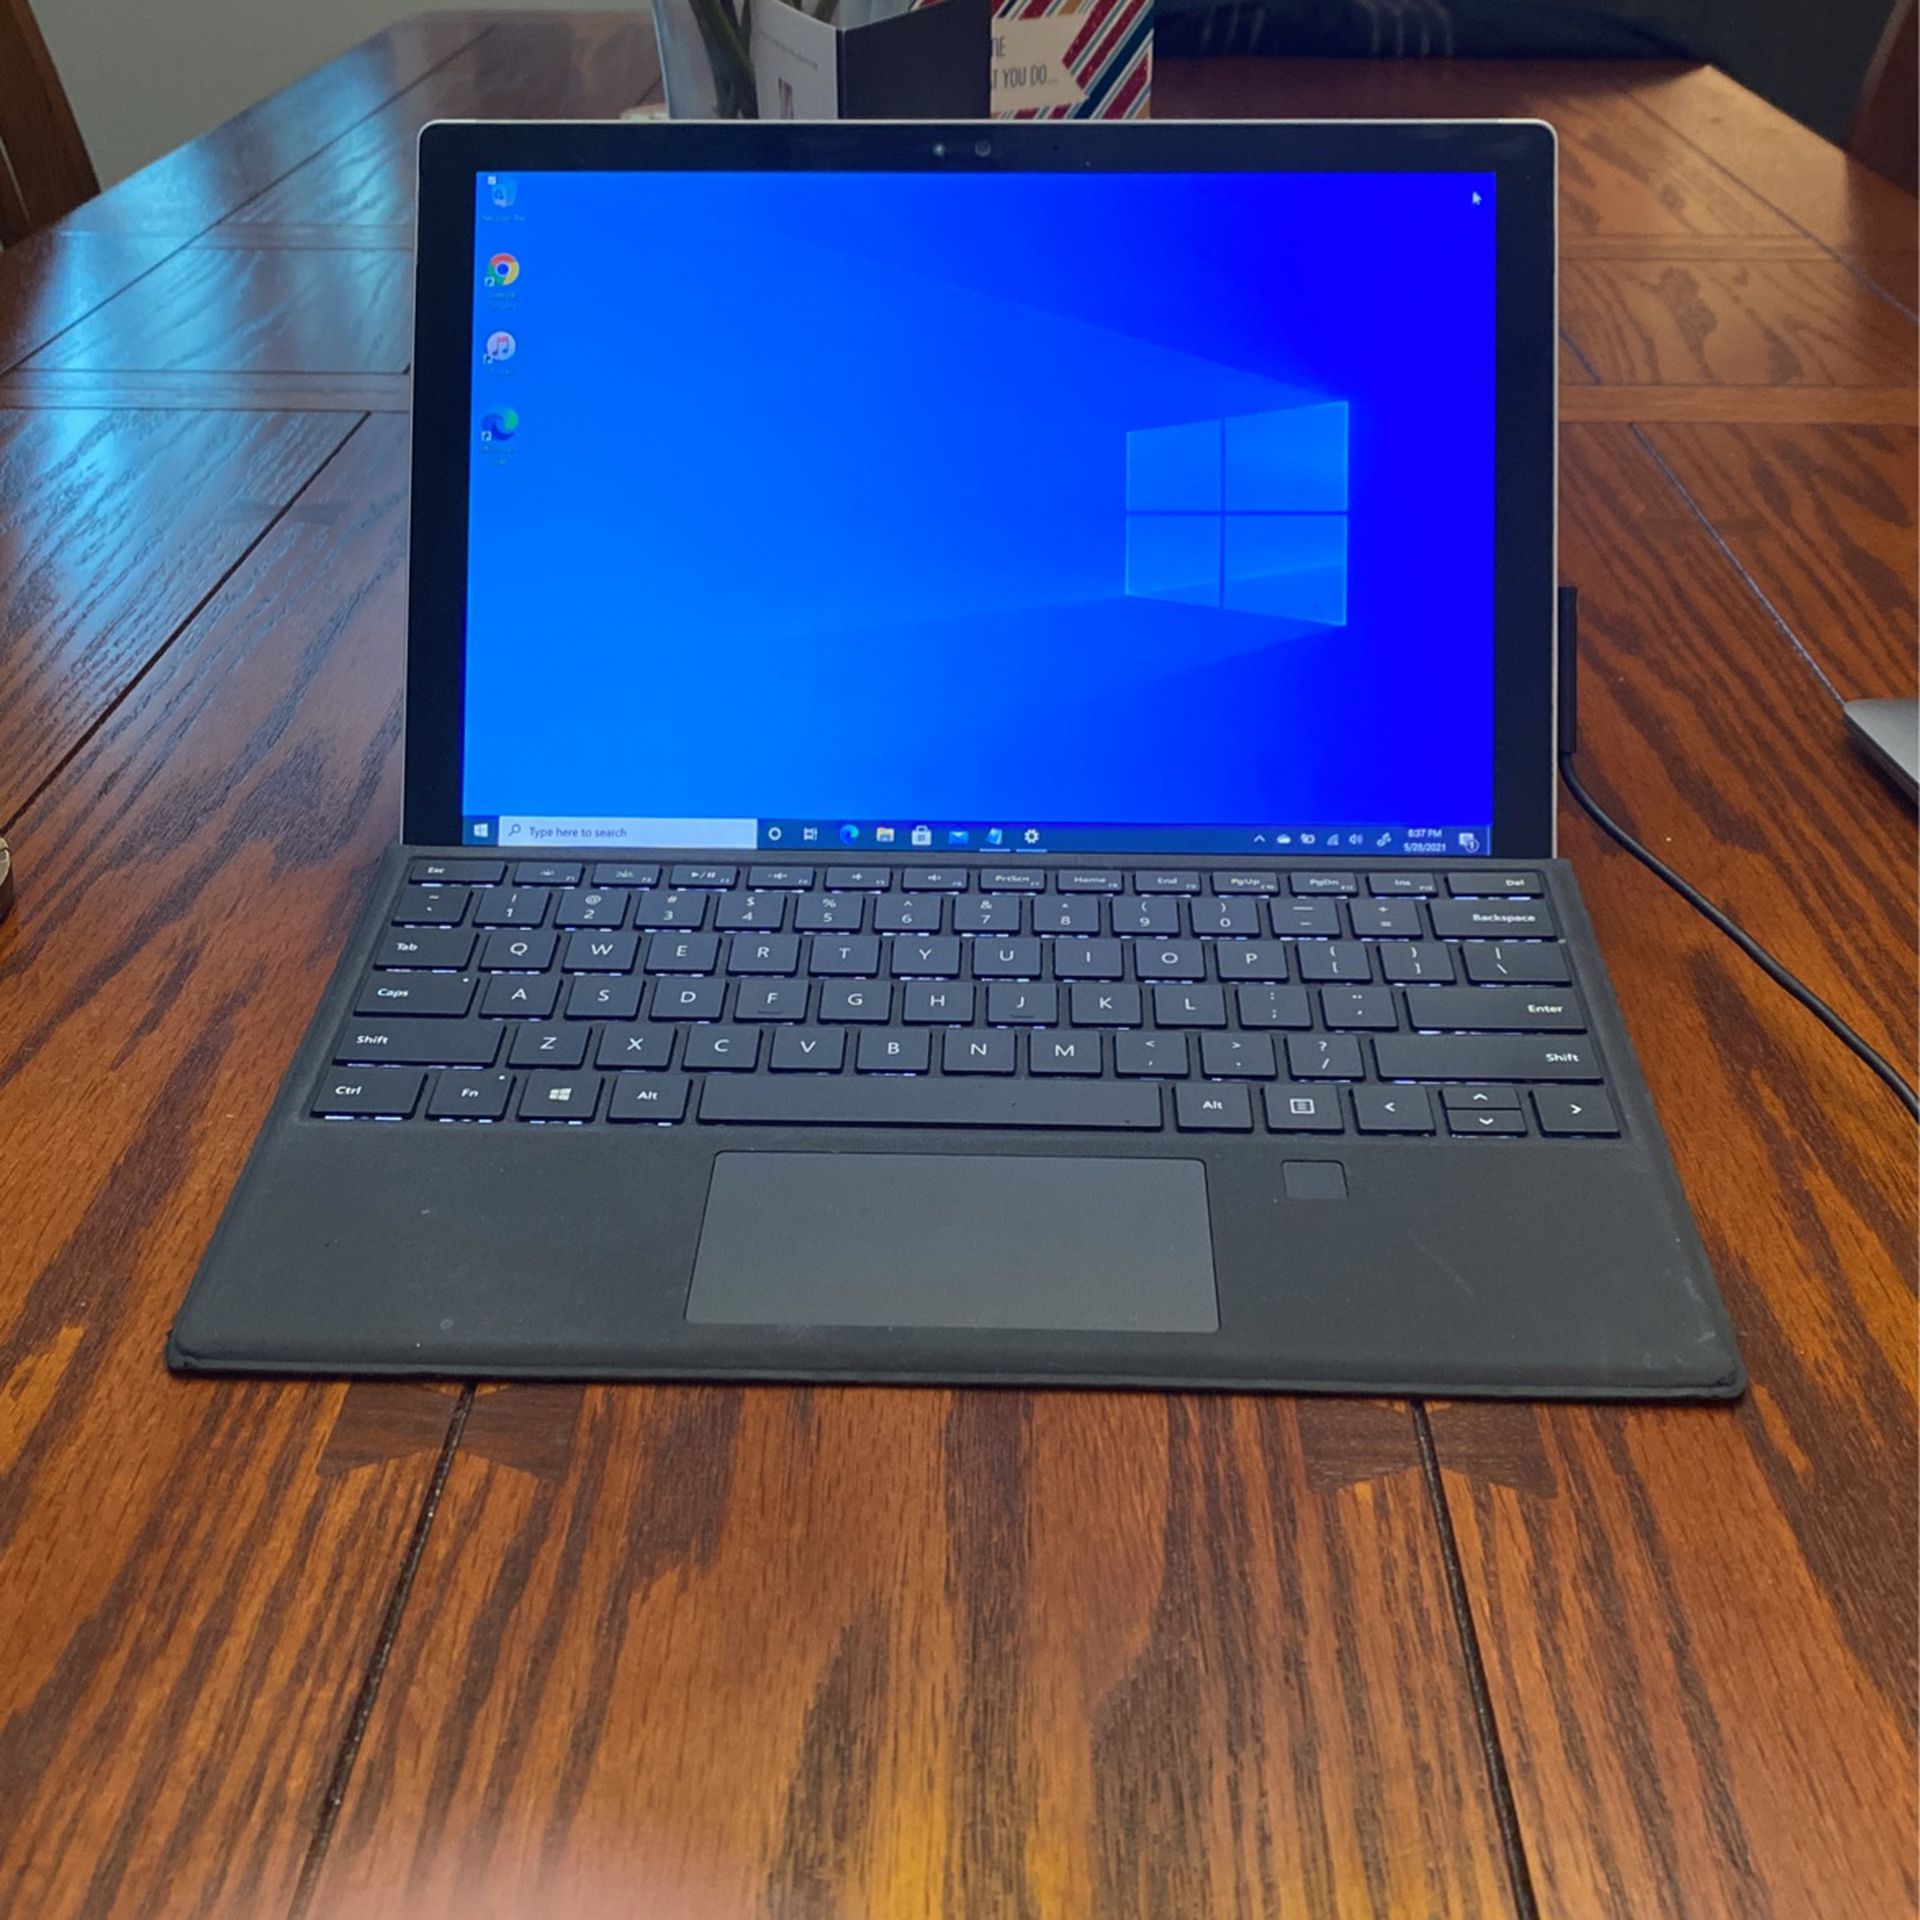 Microsoft Surface Pro 4 With Docking Station 